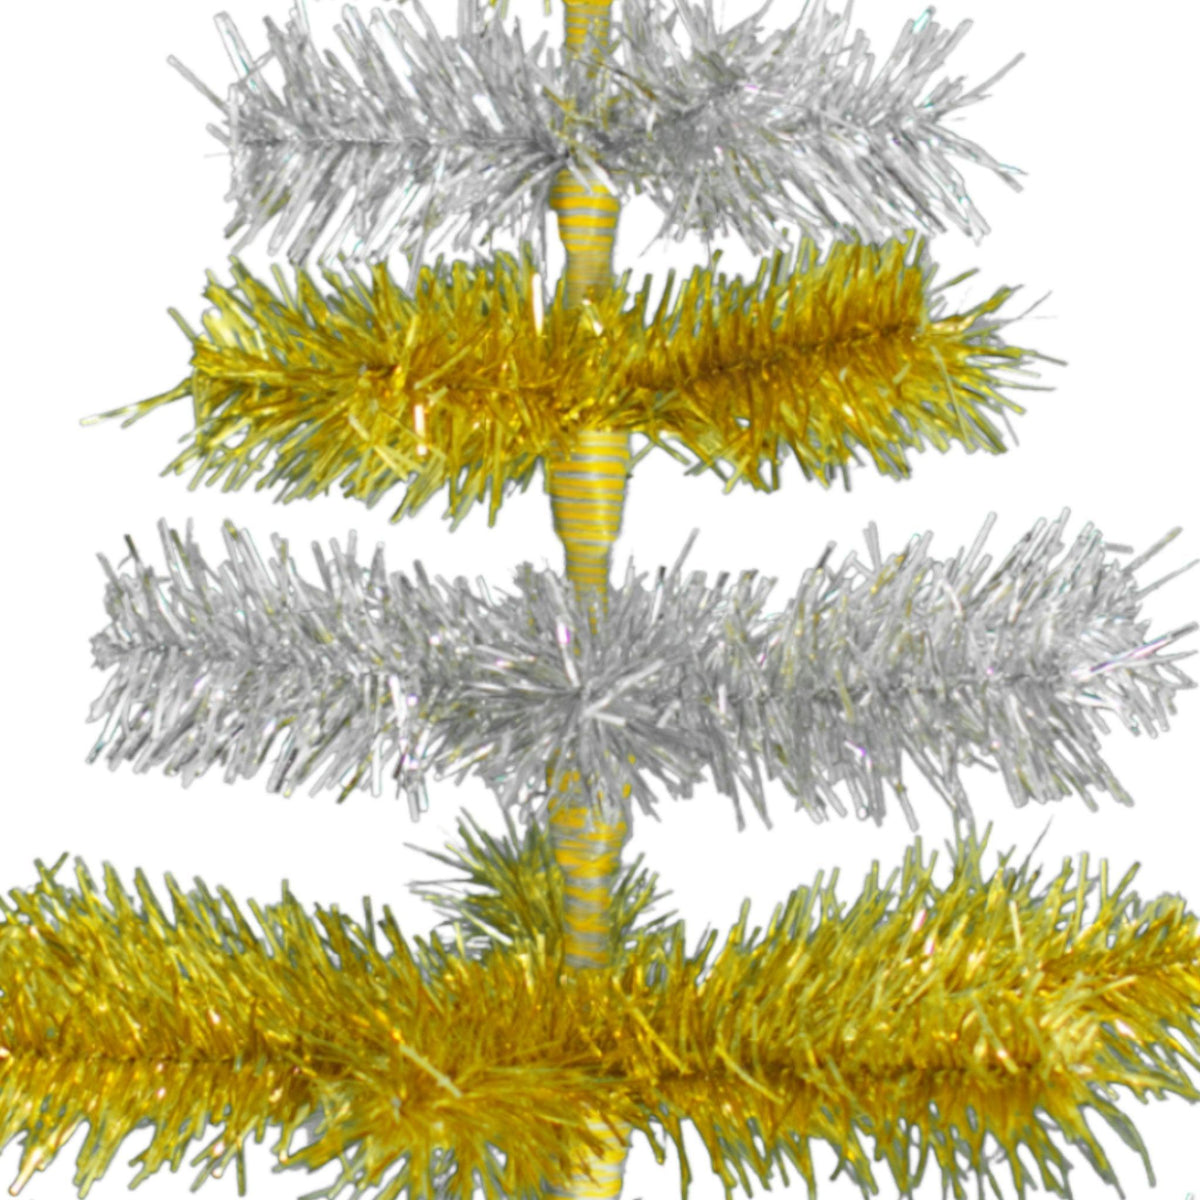 24in tall Shiny Gold and Metallic Silver Layered Tinsel Christmas Trees on sale at leedisplay.com